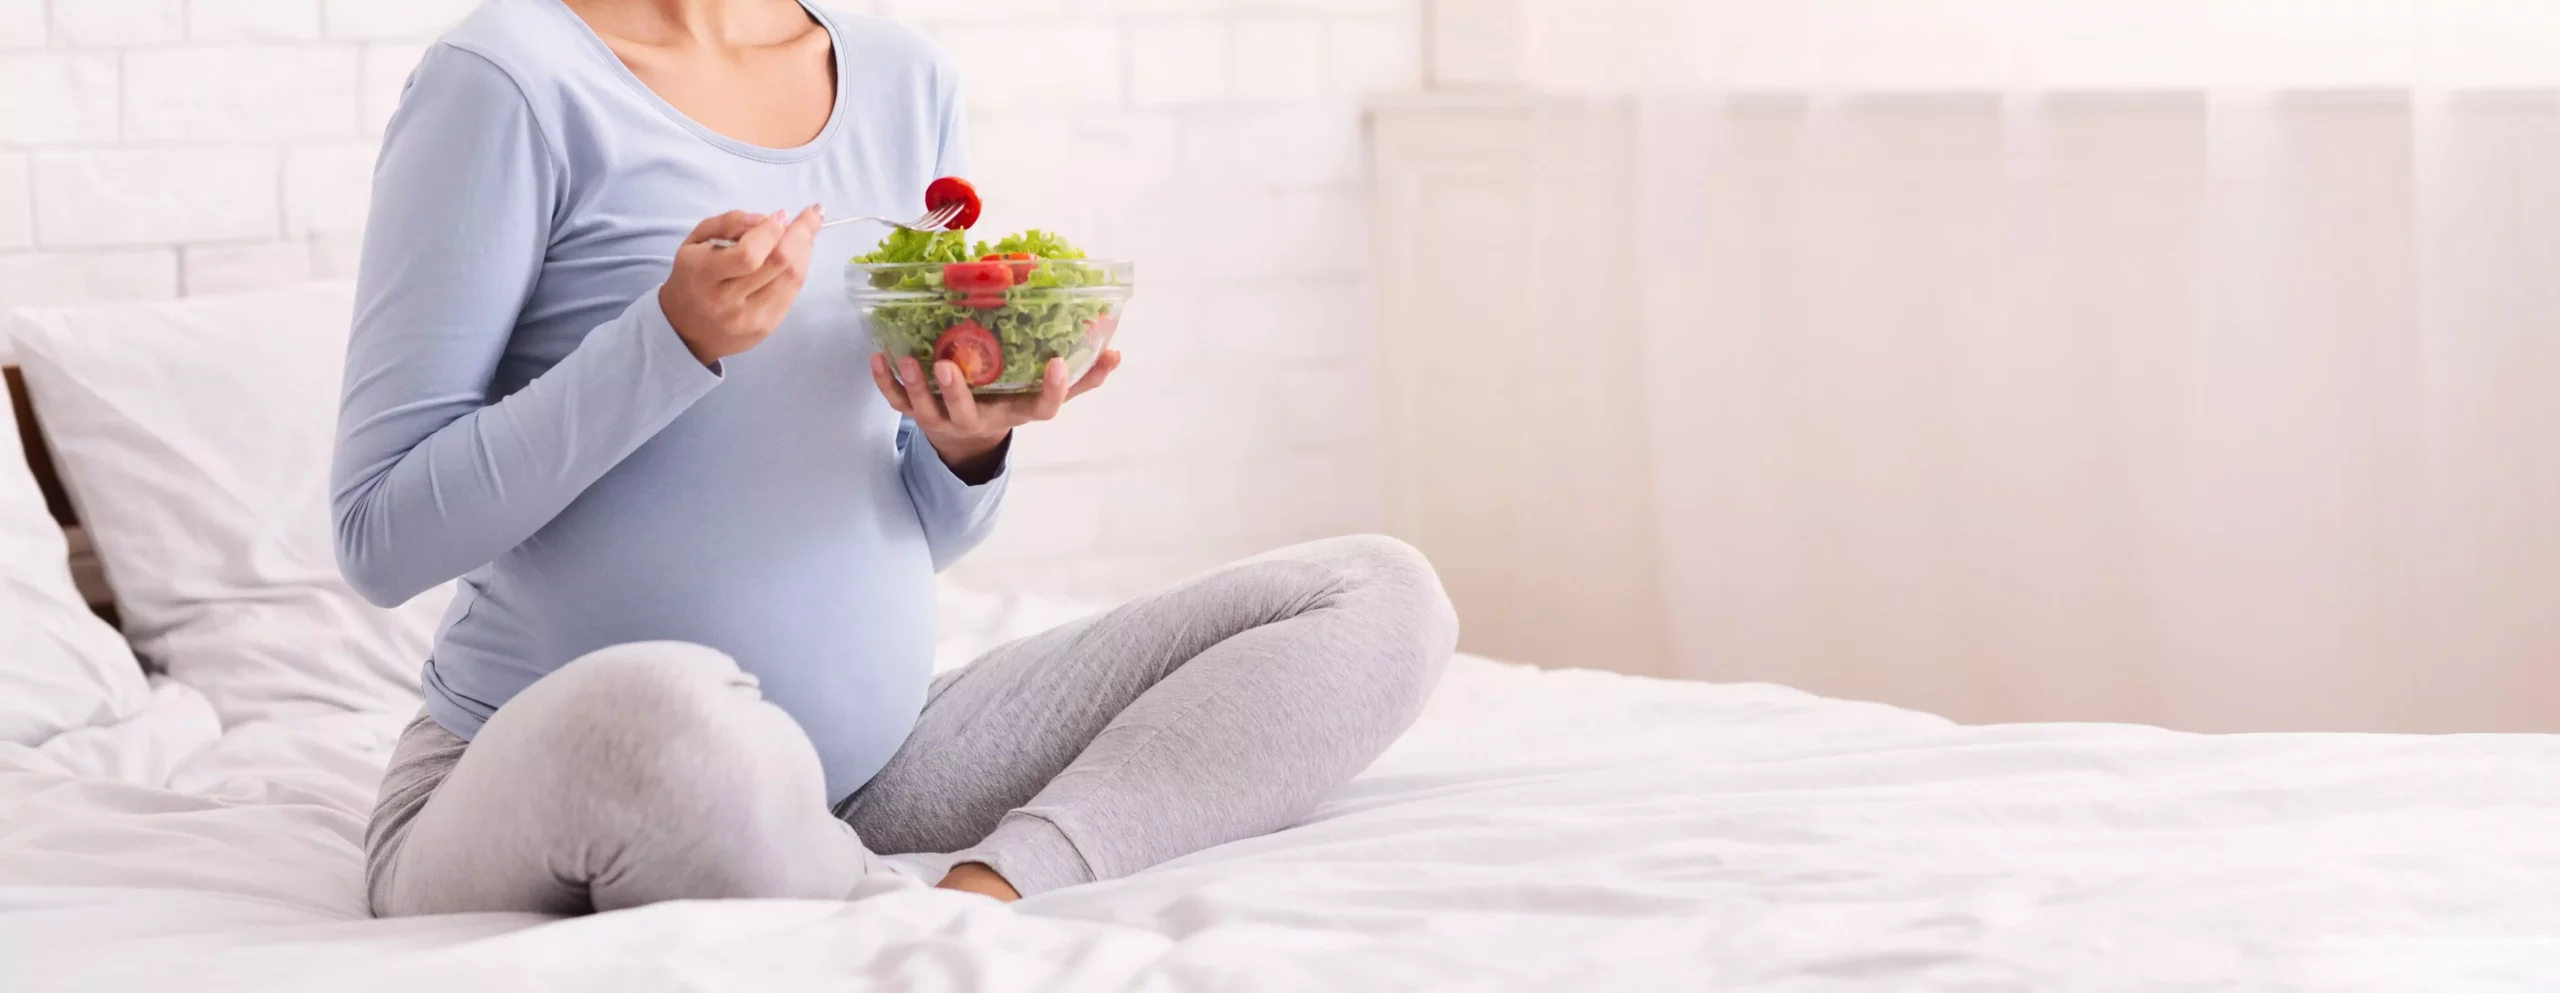 Pregnancy diet what to eat & what to avoid Featured image